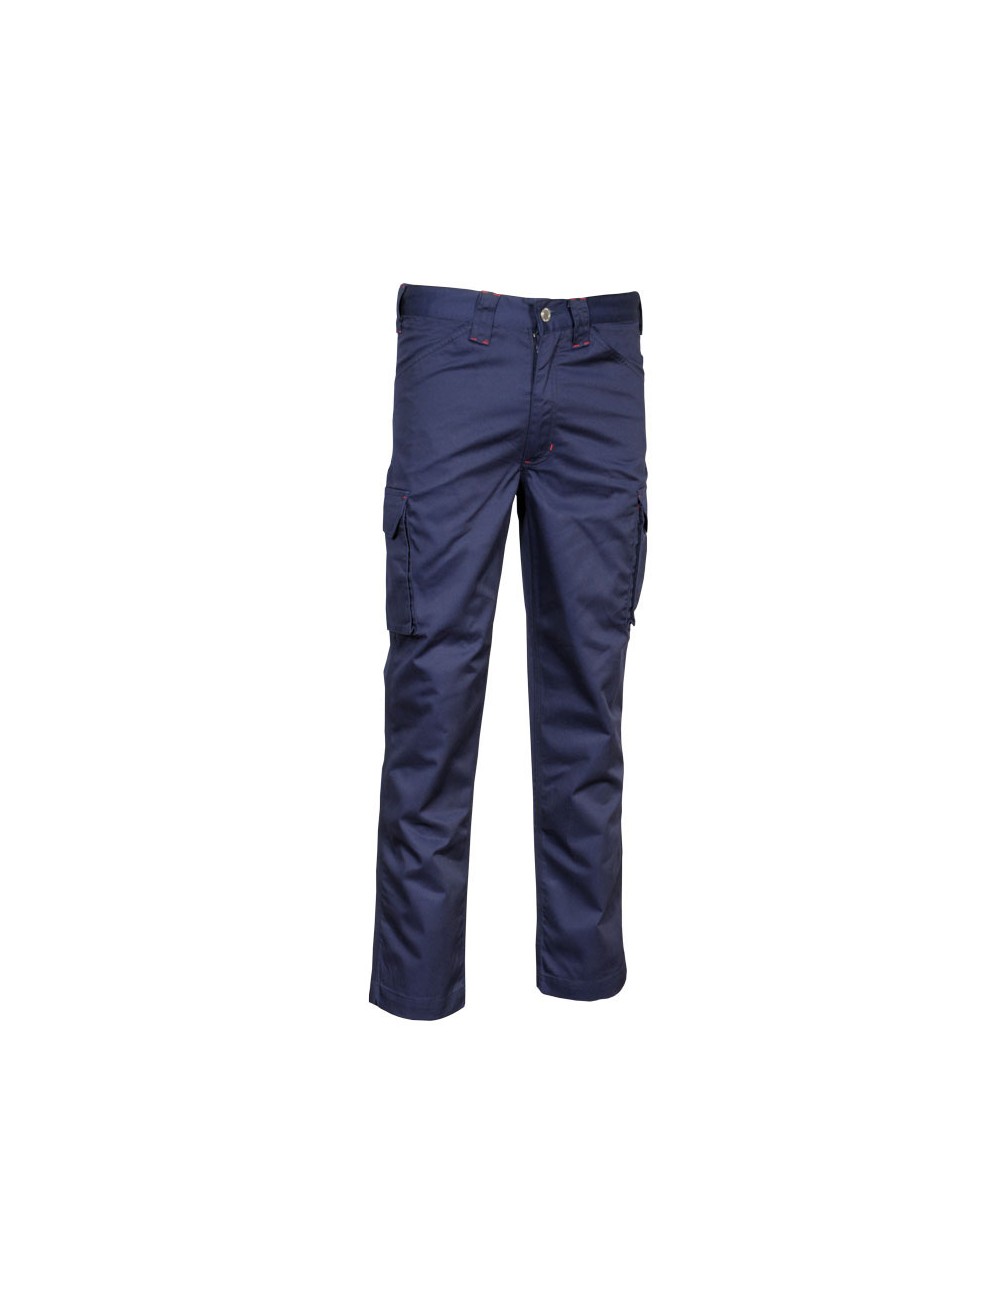 MEN'S WORK TROUSERS WITH...